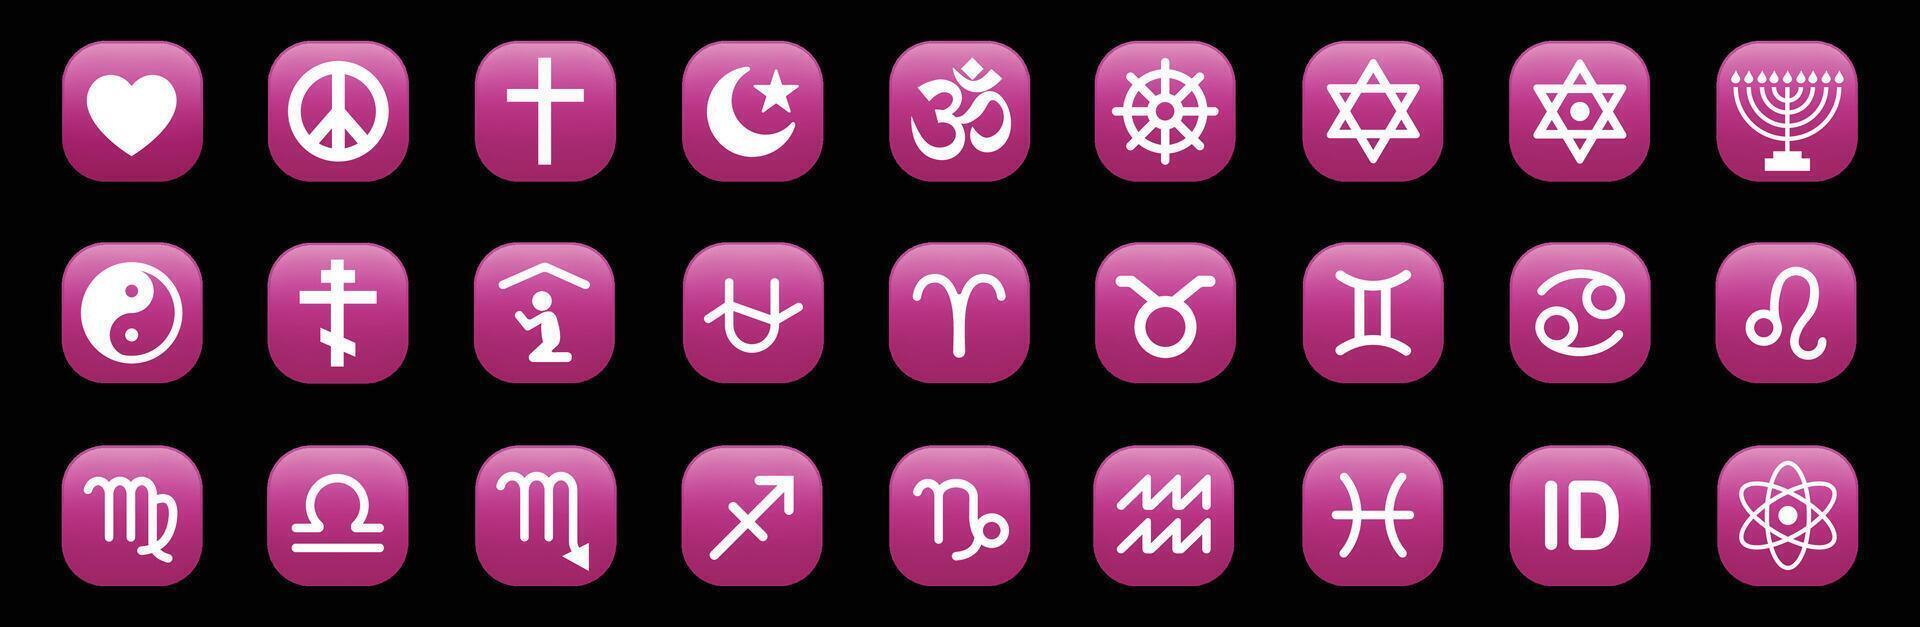 Zodiac horoscope signs illustrations. Set of simple Zodiac Signs symbols emoji. The isolated gradient purple astrological sign emoji collection vector